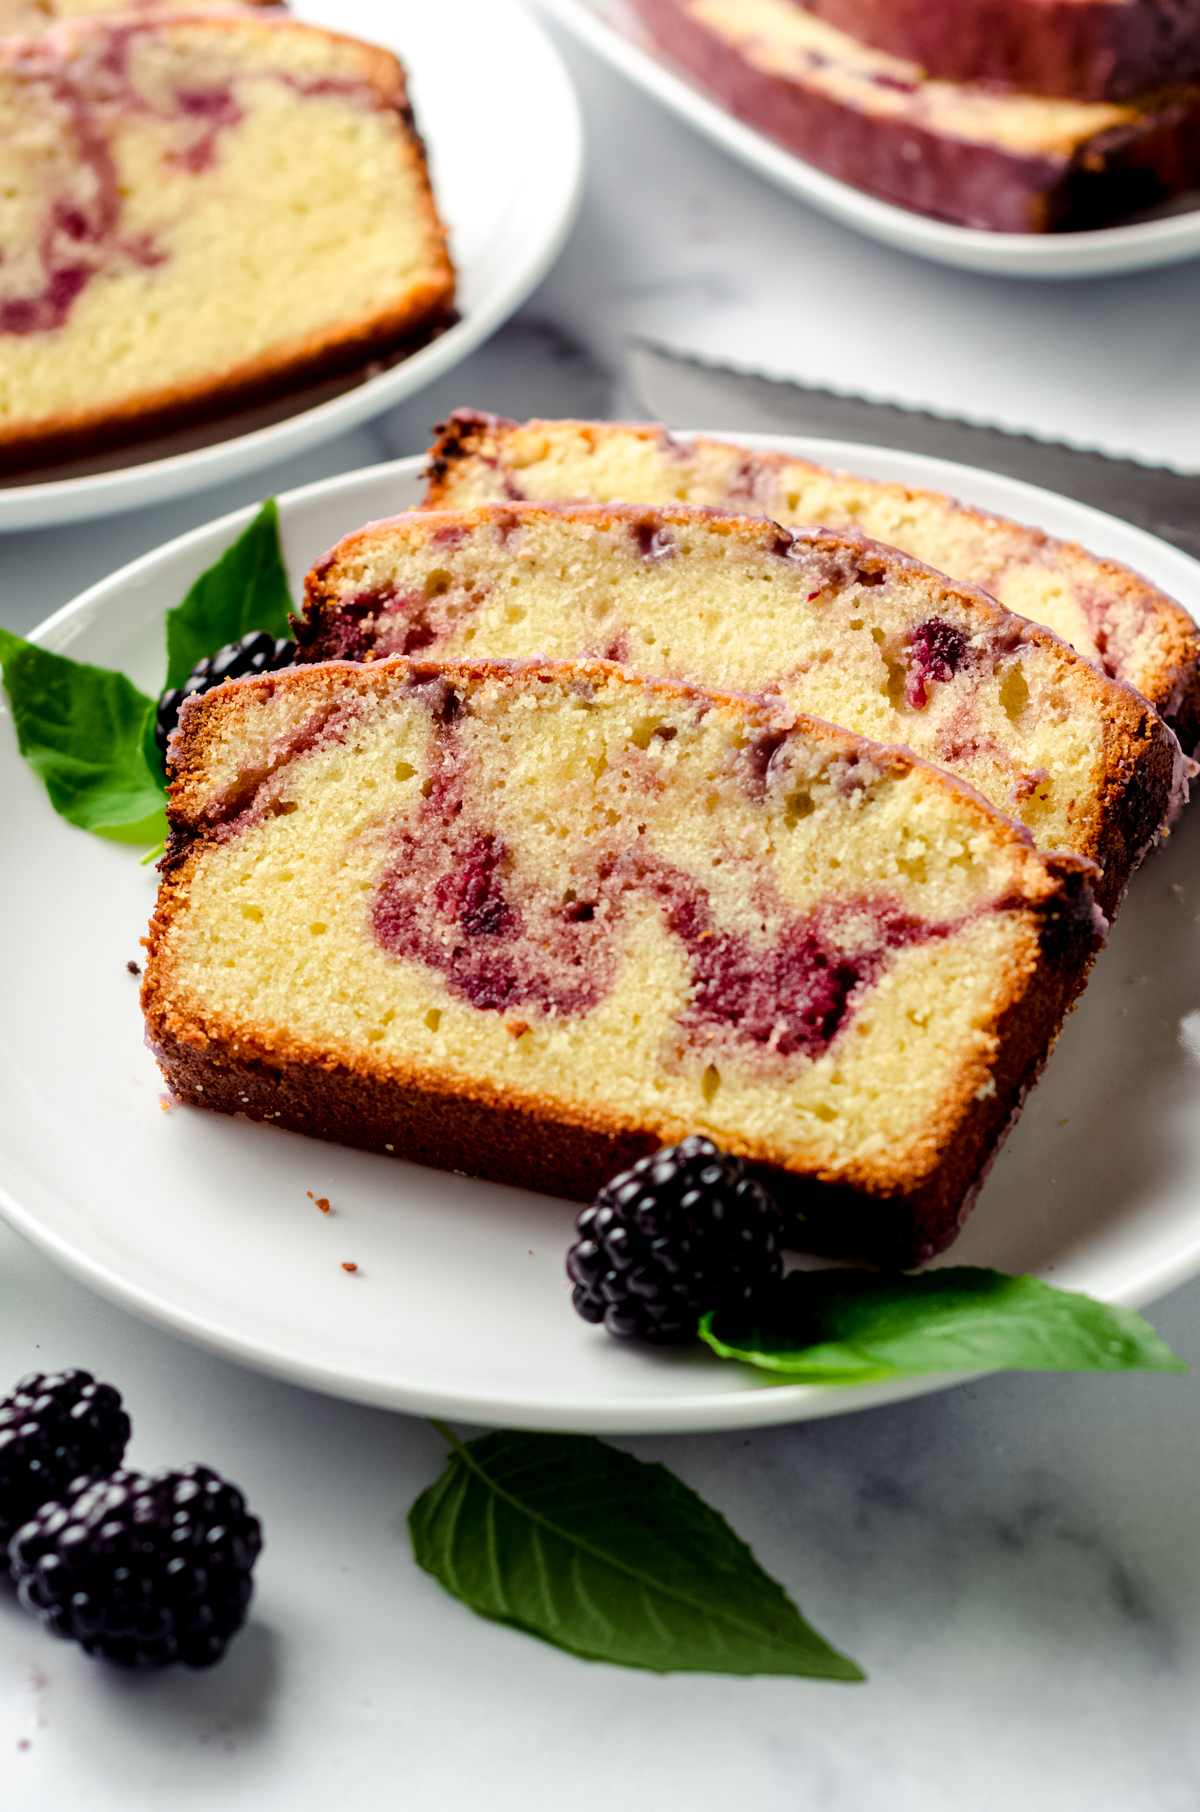 Slices of blackberry pound cake on a plate.